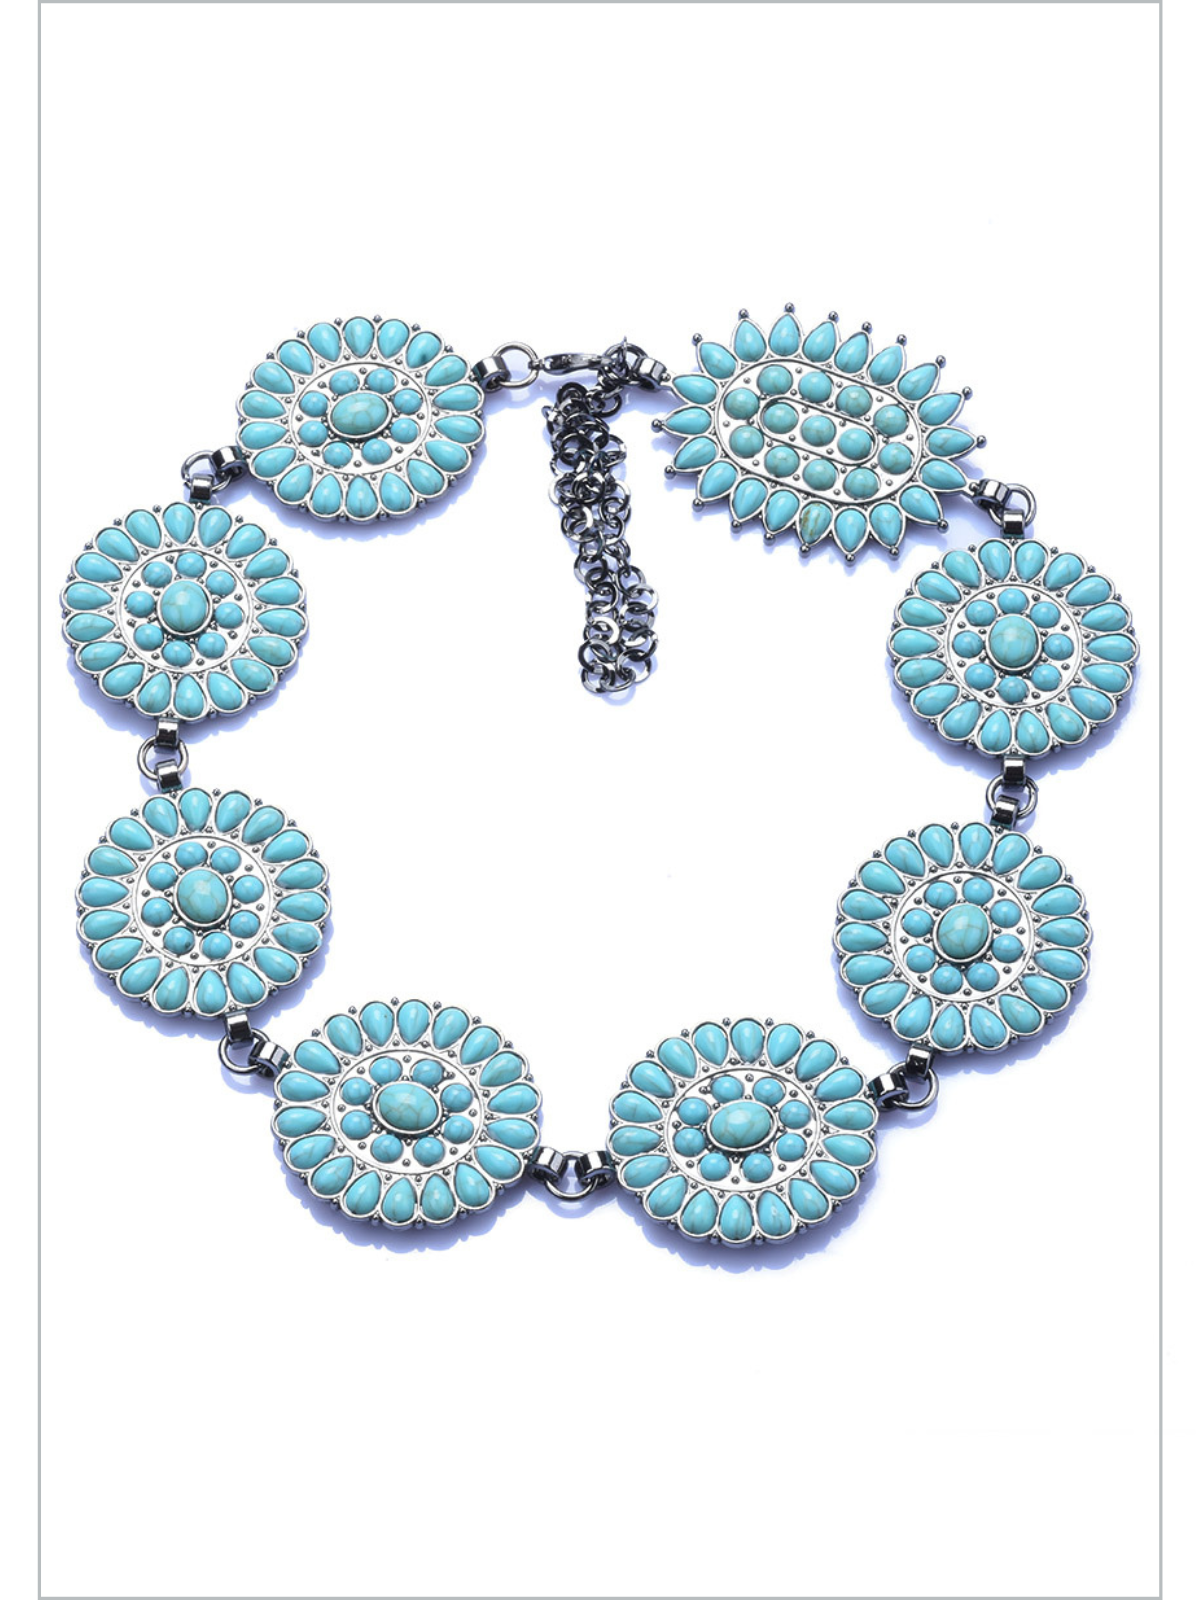 Girls Clothing Accessories | Turquoise Chain Belt | Mia Belle Girls